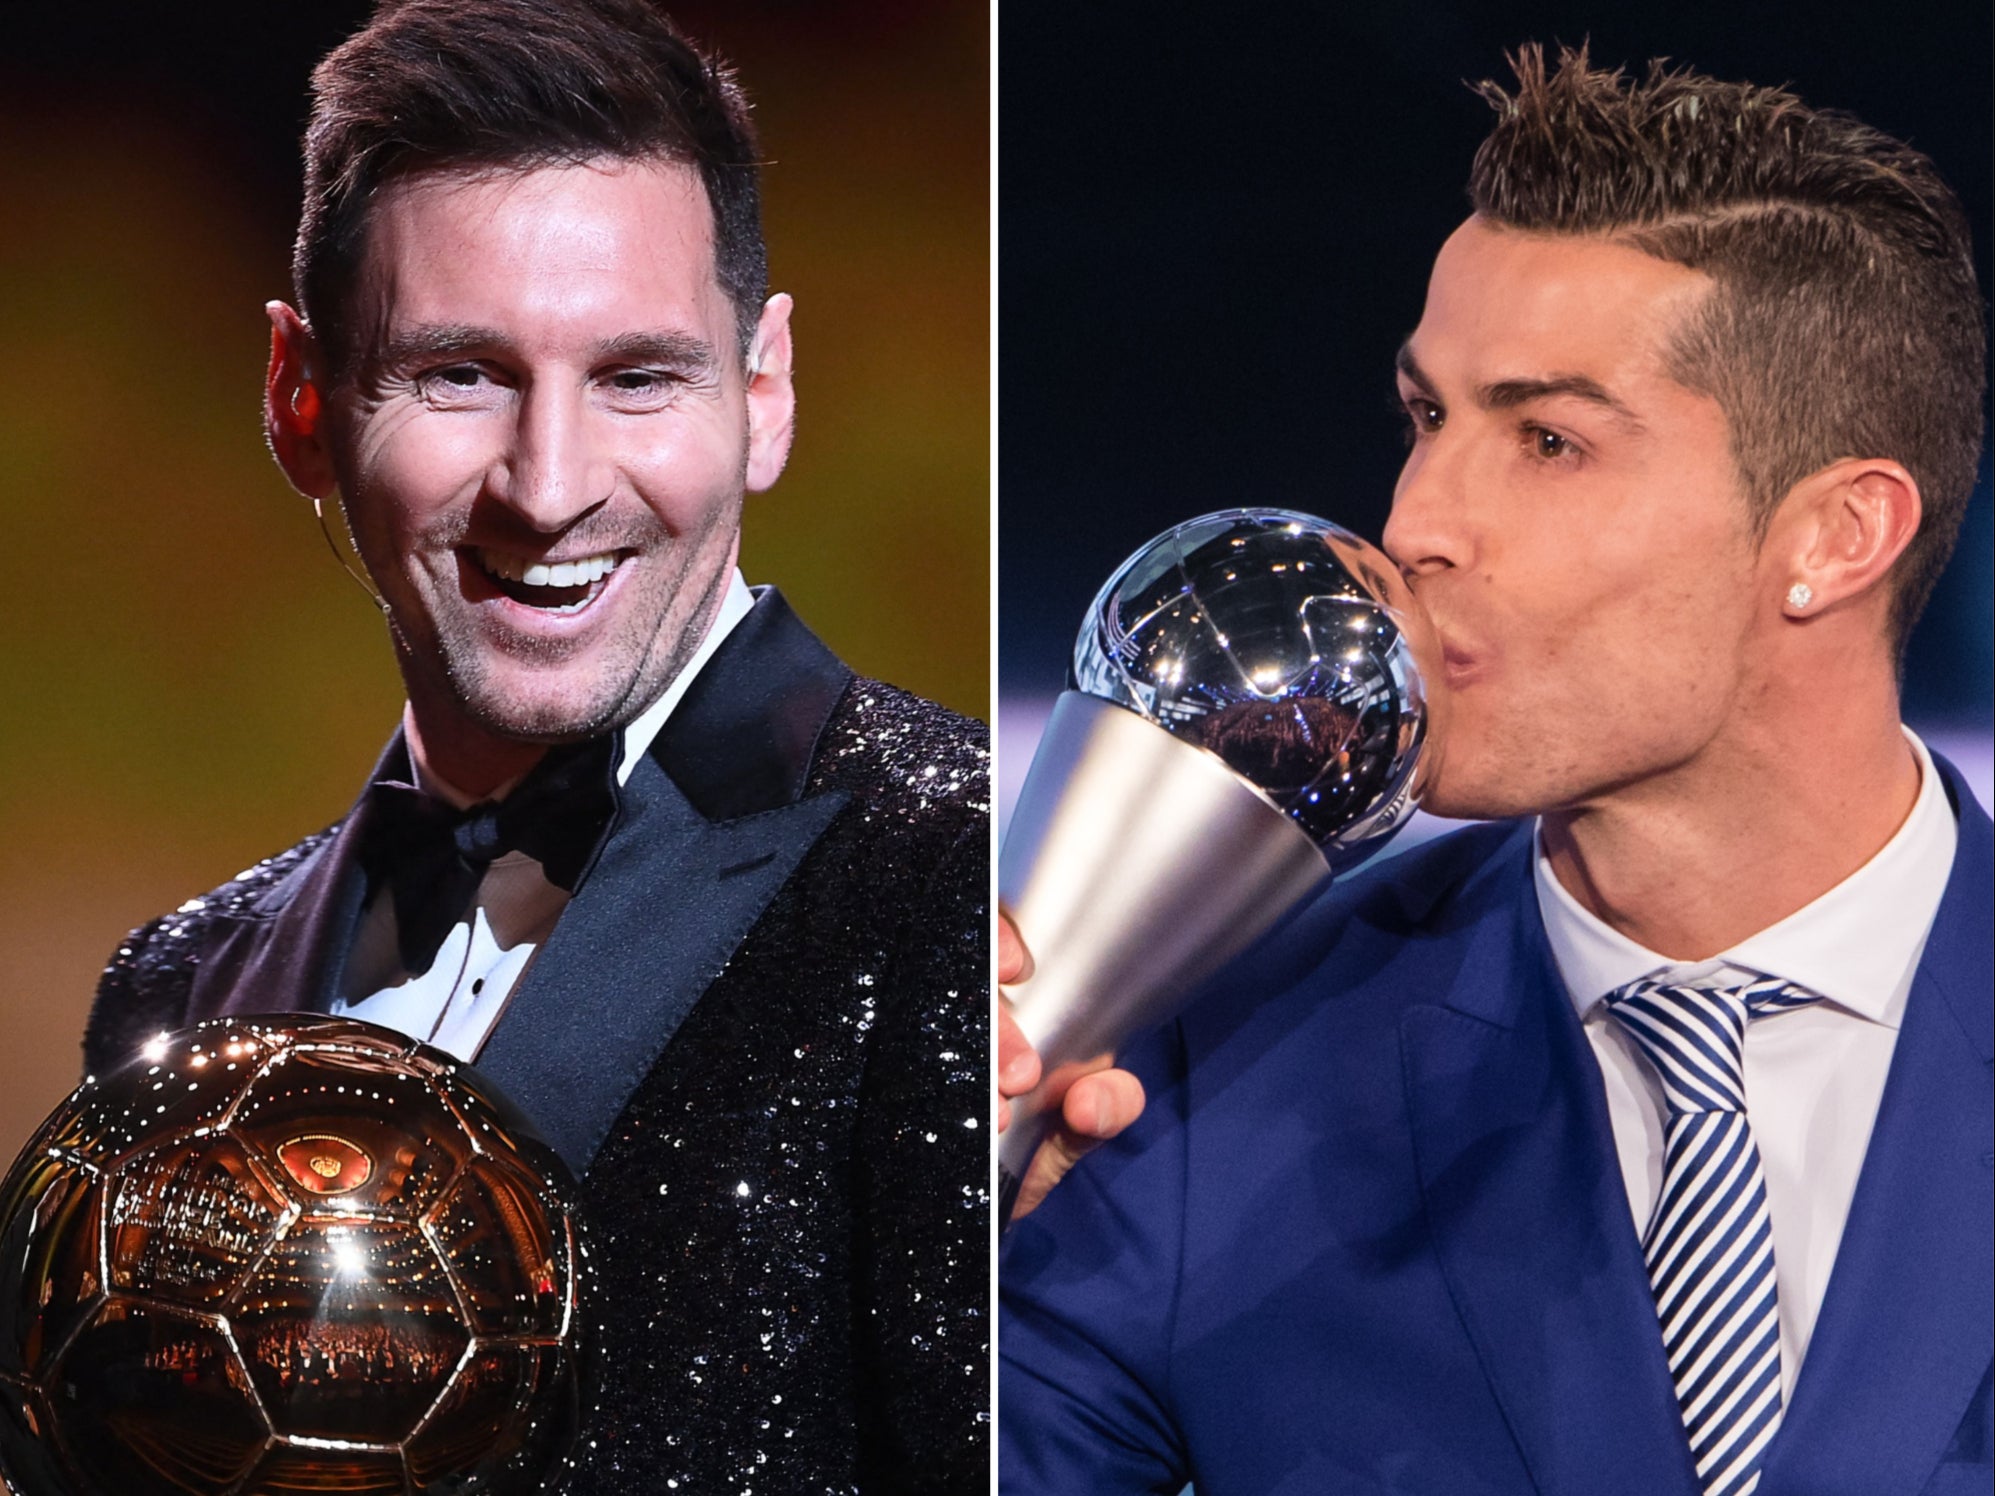 What is the difference between the Ballon d’Or and The Best Fifa Awards